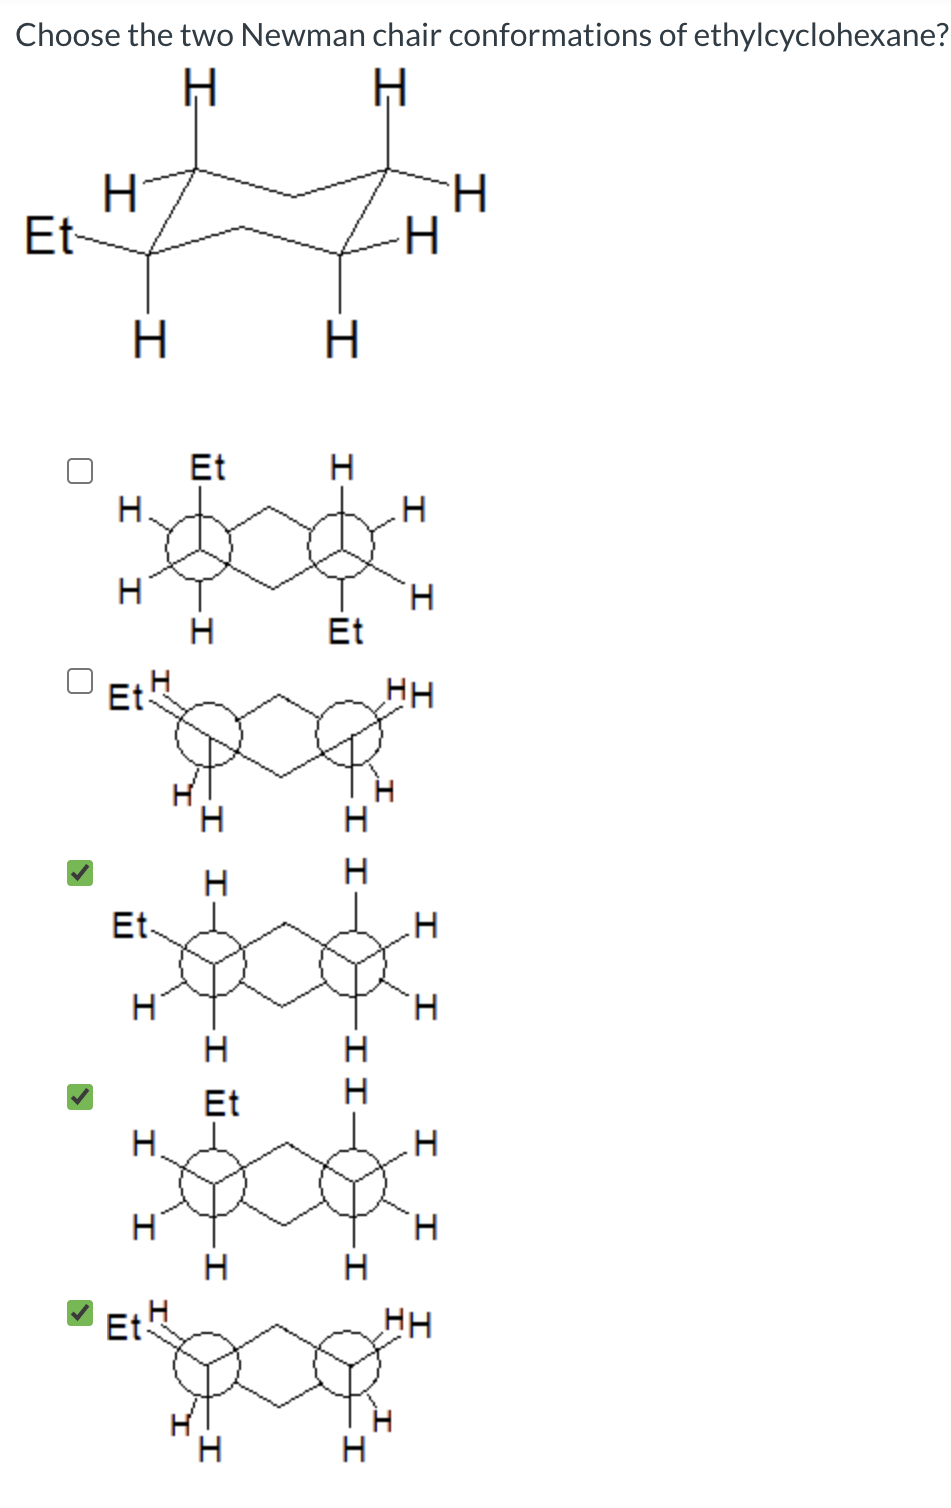 Choose the two Newman chair conformations of ethylcyclohexane?
H.
Et-
Et
H.
H.
Et
H
Et
HH
H
Et-
H.
Et
Н.
H
H.
H
Et-
HH
H
- IІ
-II
I W.
